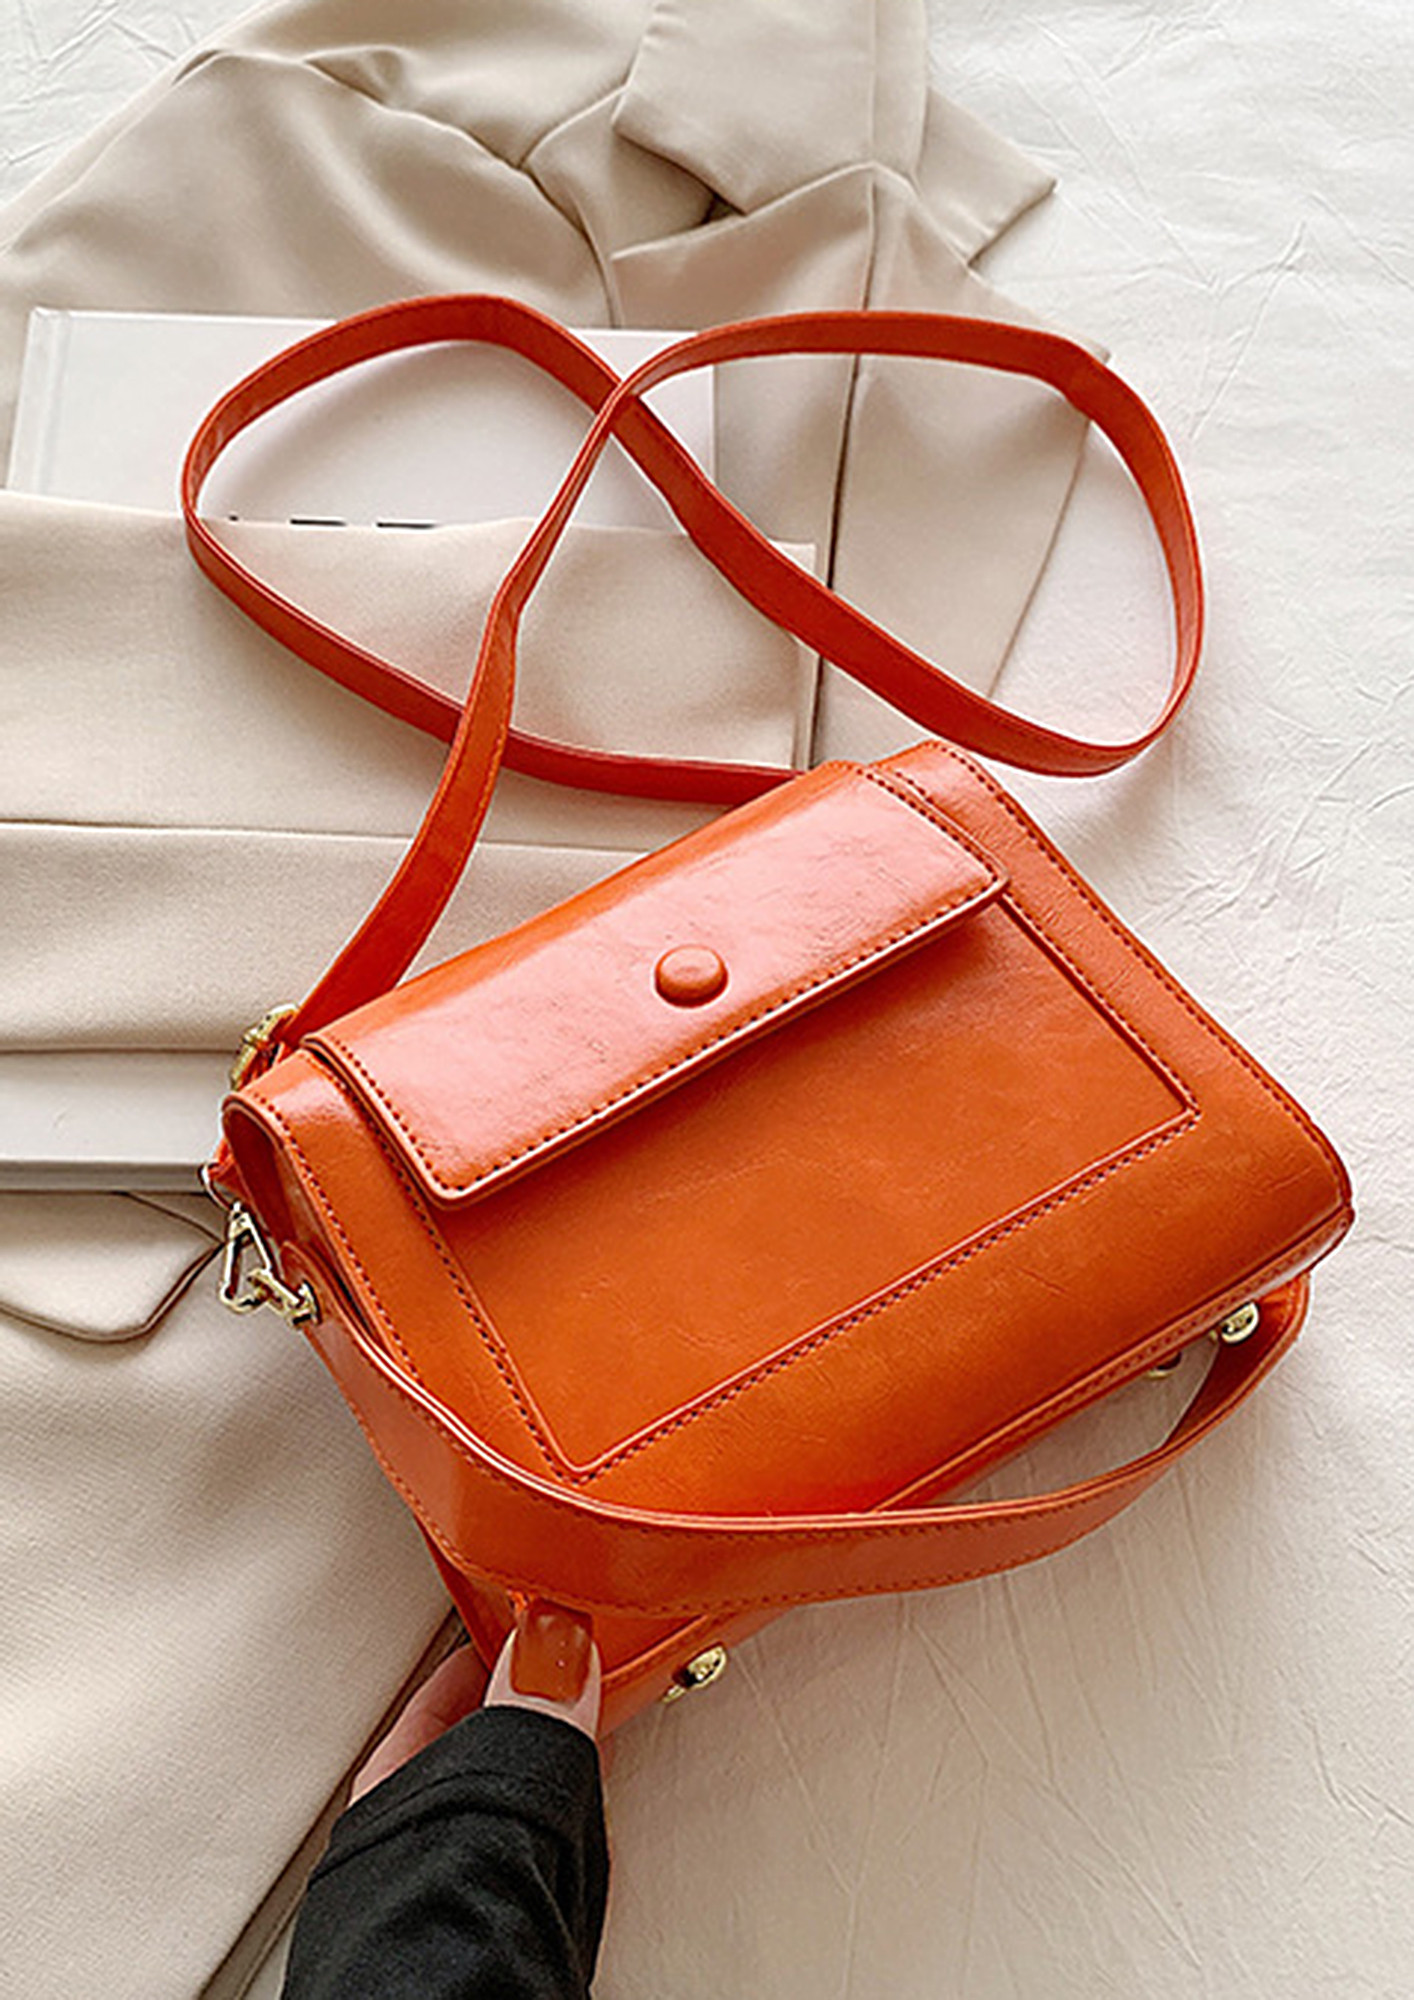 Hailey Bieber's Bold Tangerine Bag Is $3,400, but This One Is $26